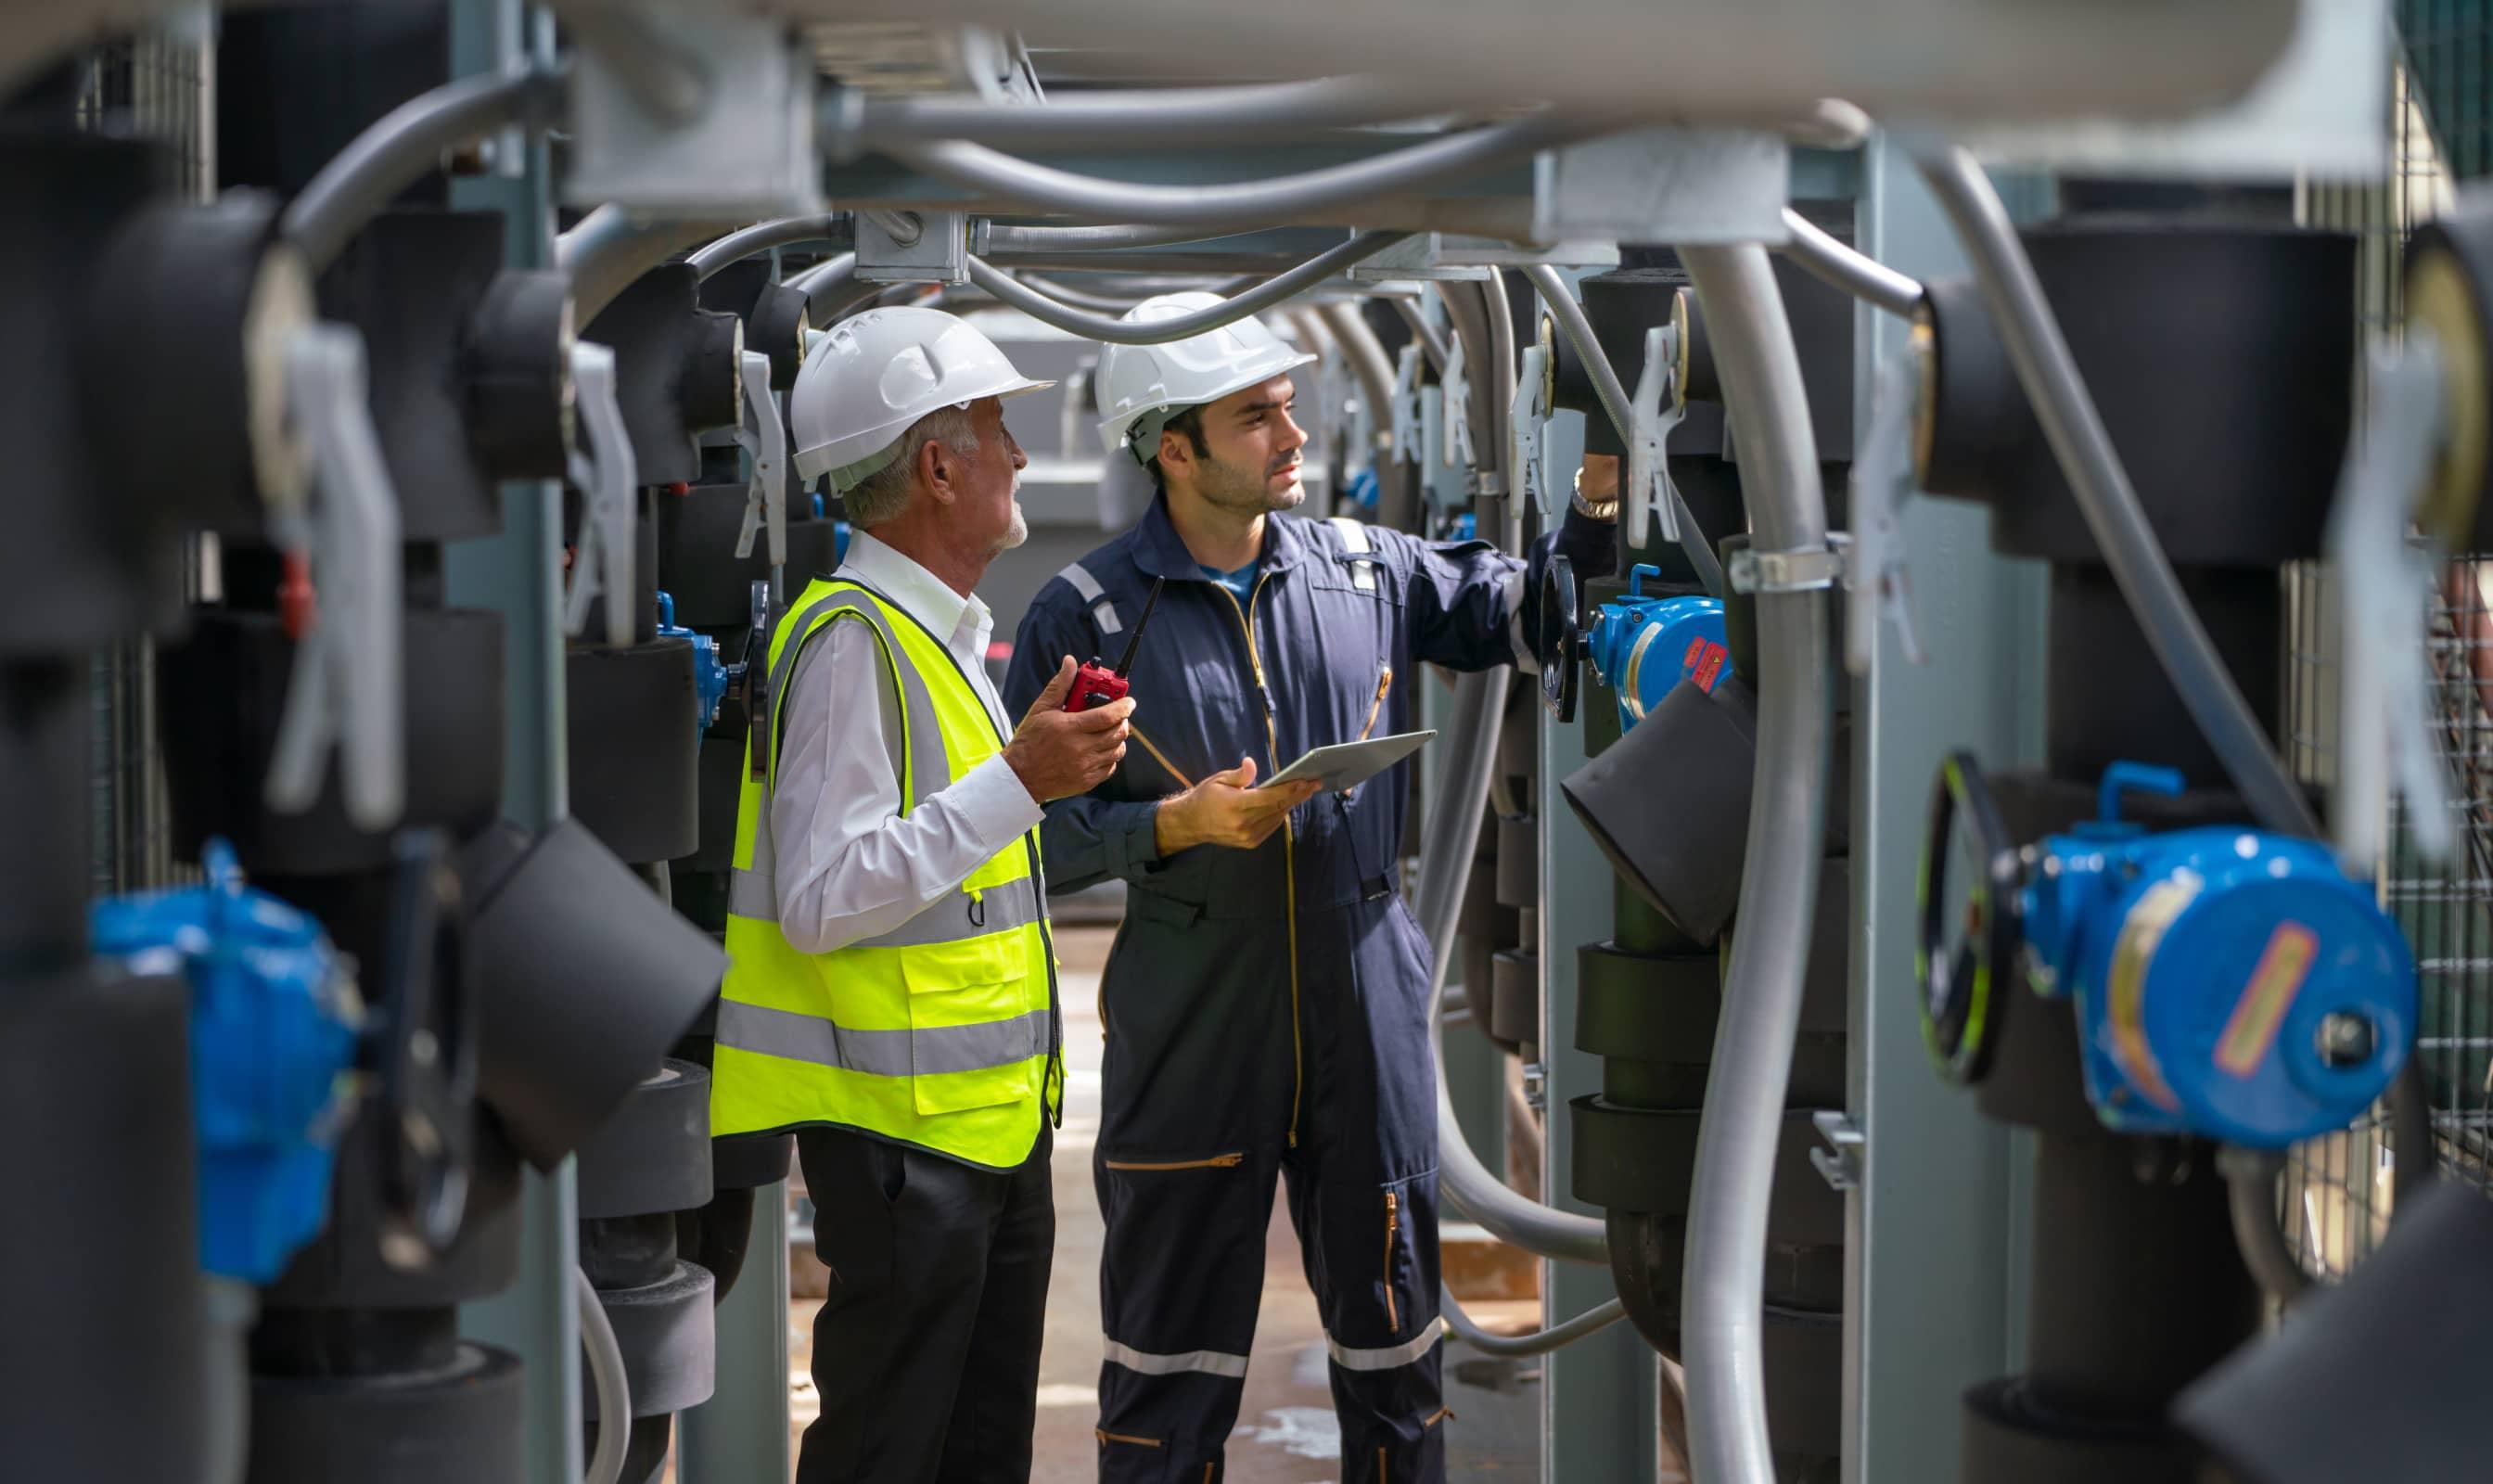 Engineers working in an electrical facility